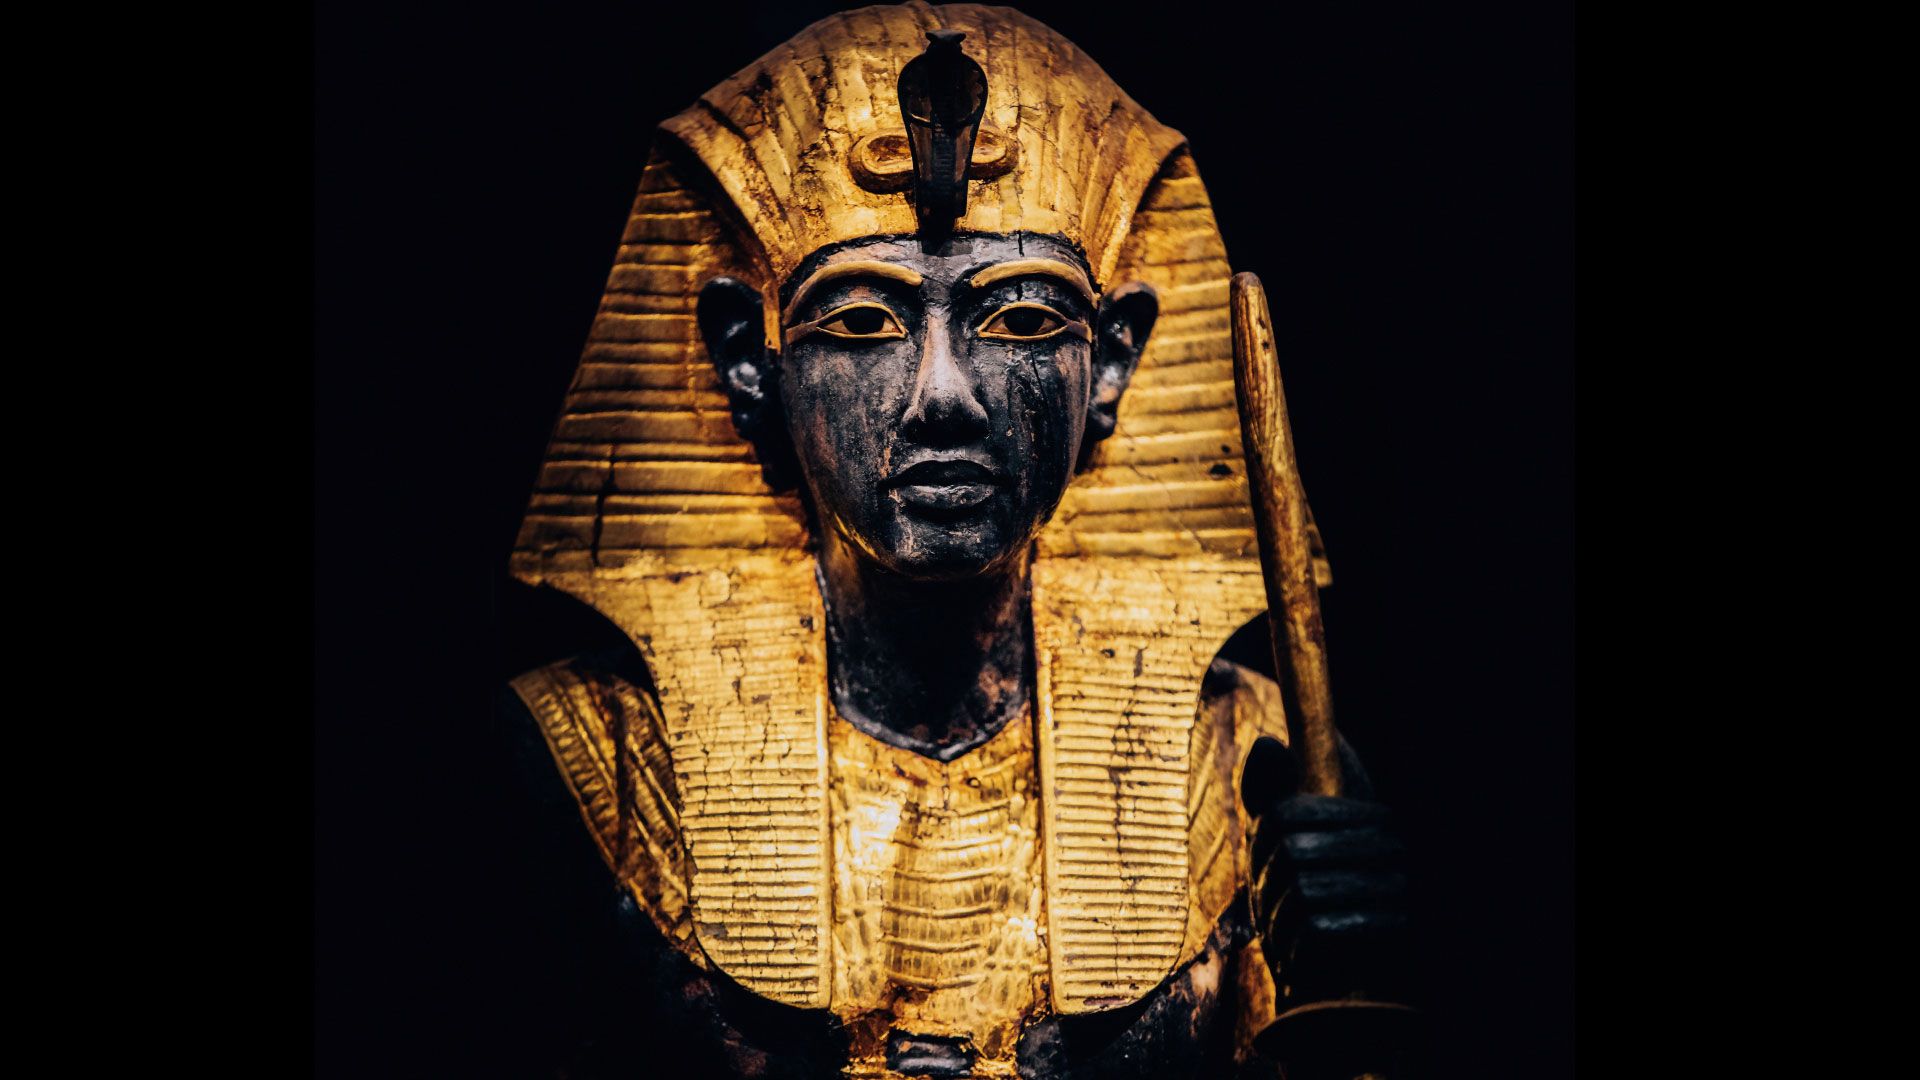 The 150 Tutankhamun artefacts in the touring exhibition include the Guardian statue of the Ka of the king wearing the Nemes headcloth © IMG